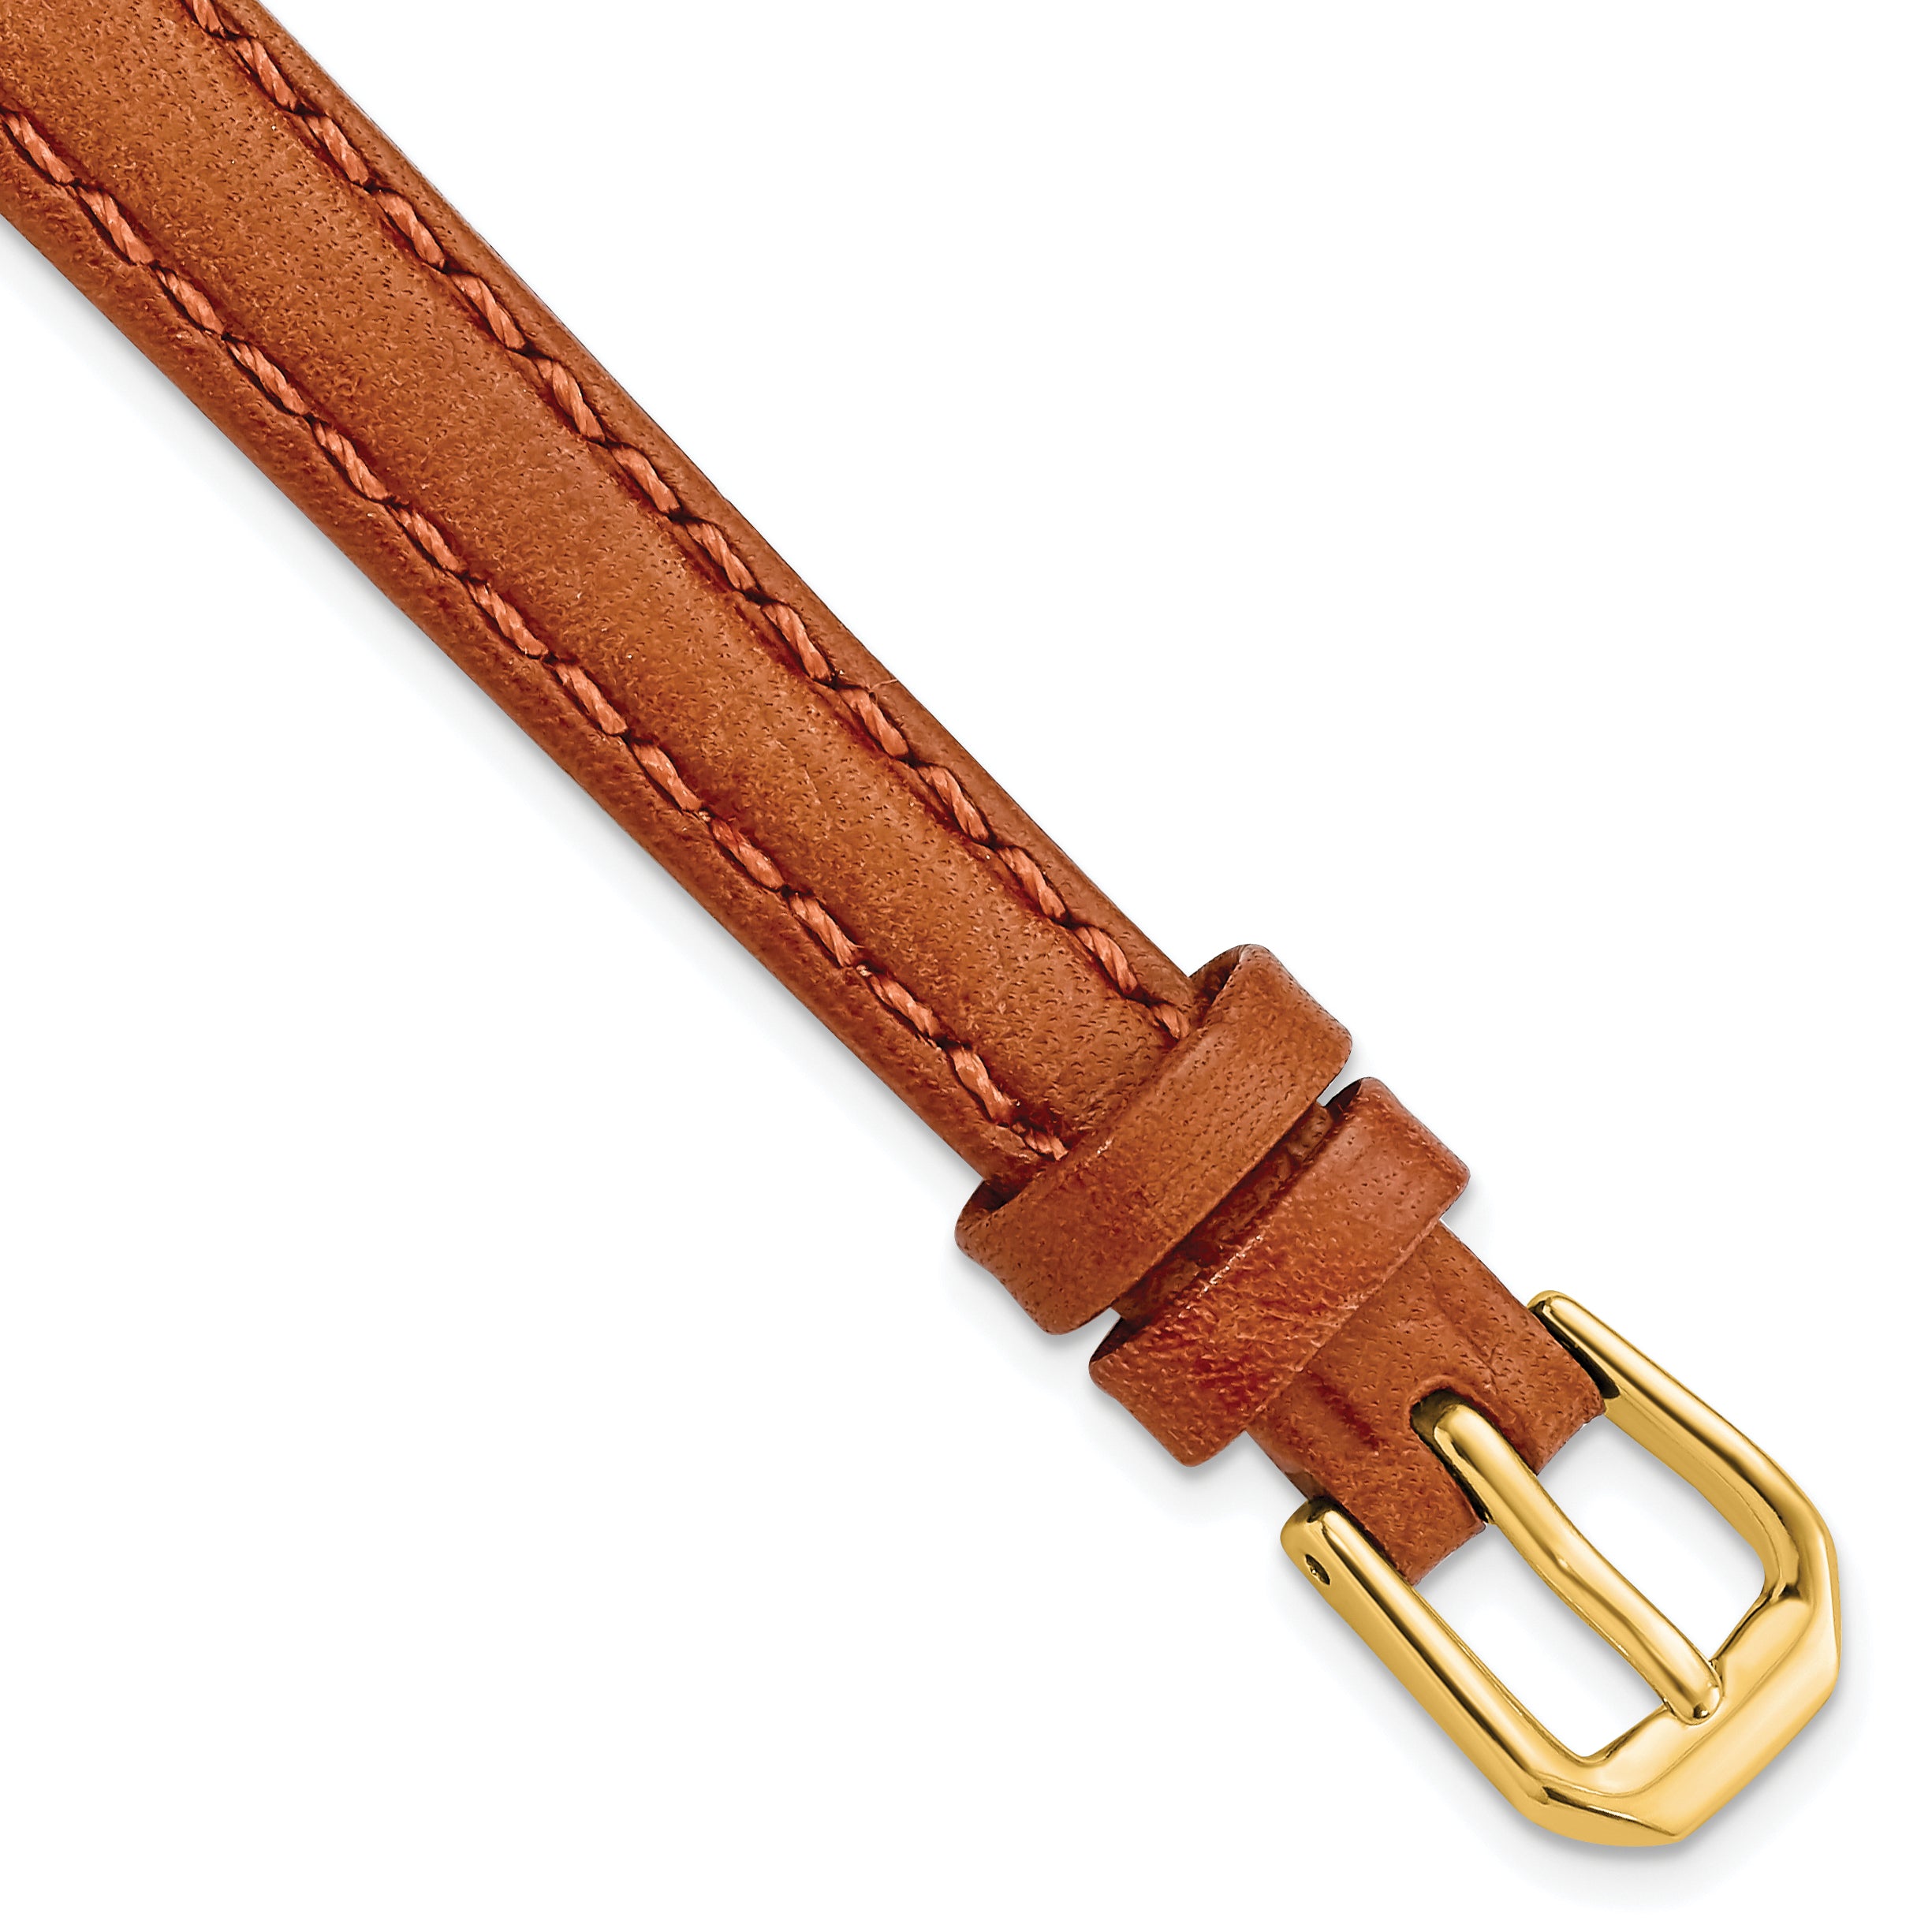 DeBeer 17mm Havana Italian Leather with Gold-tone Buckle 7.5 inch Watch Band